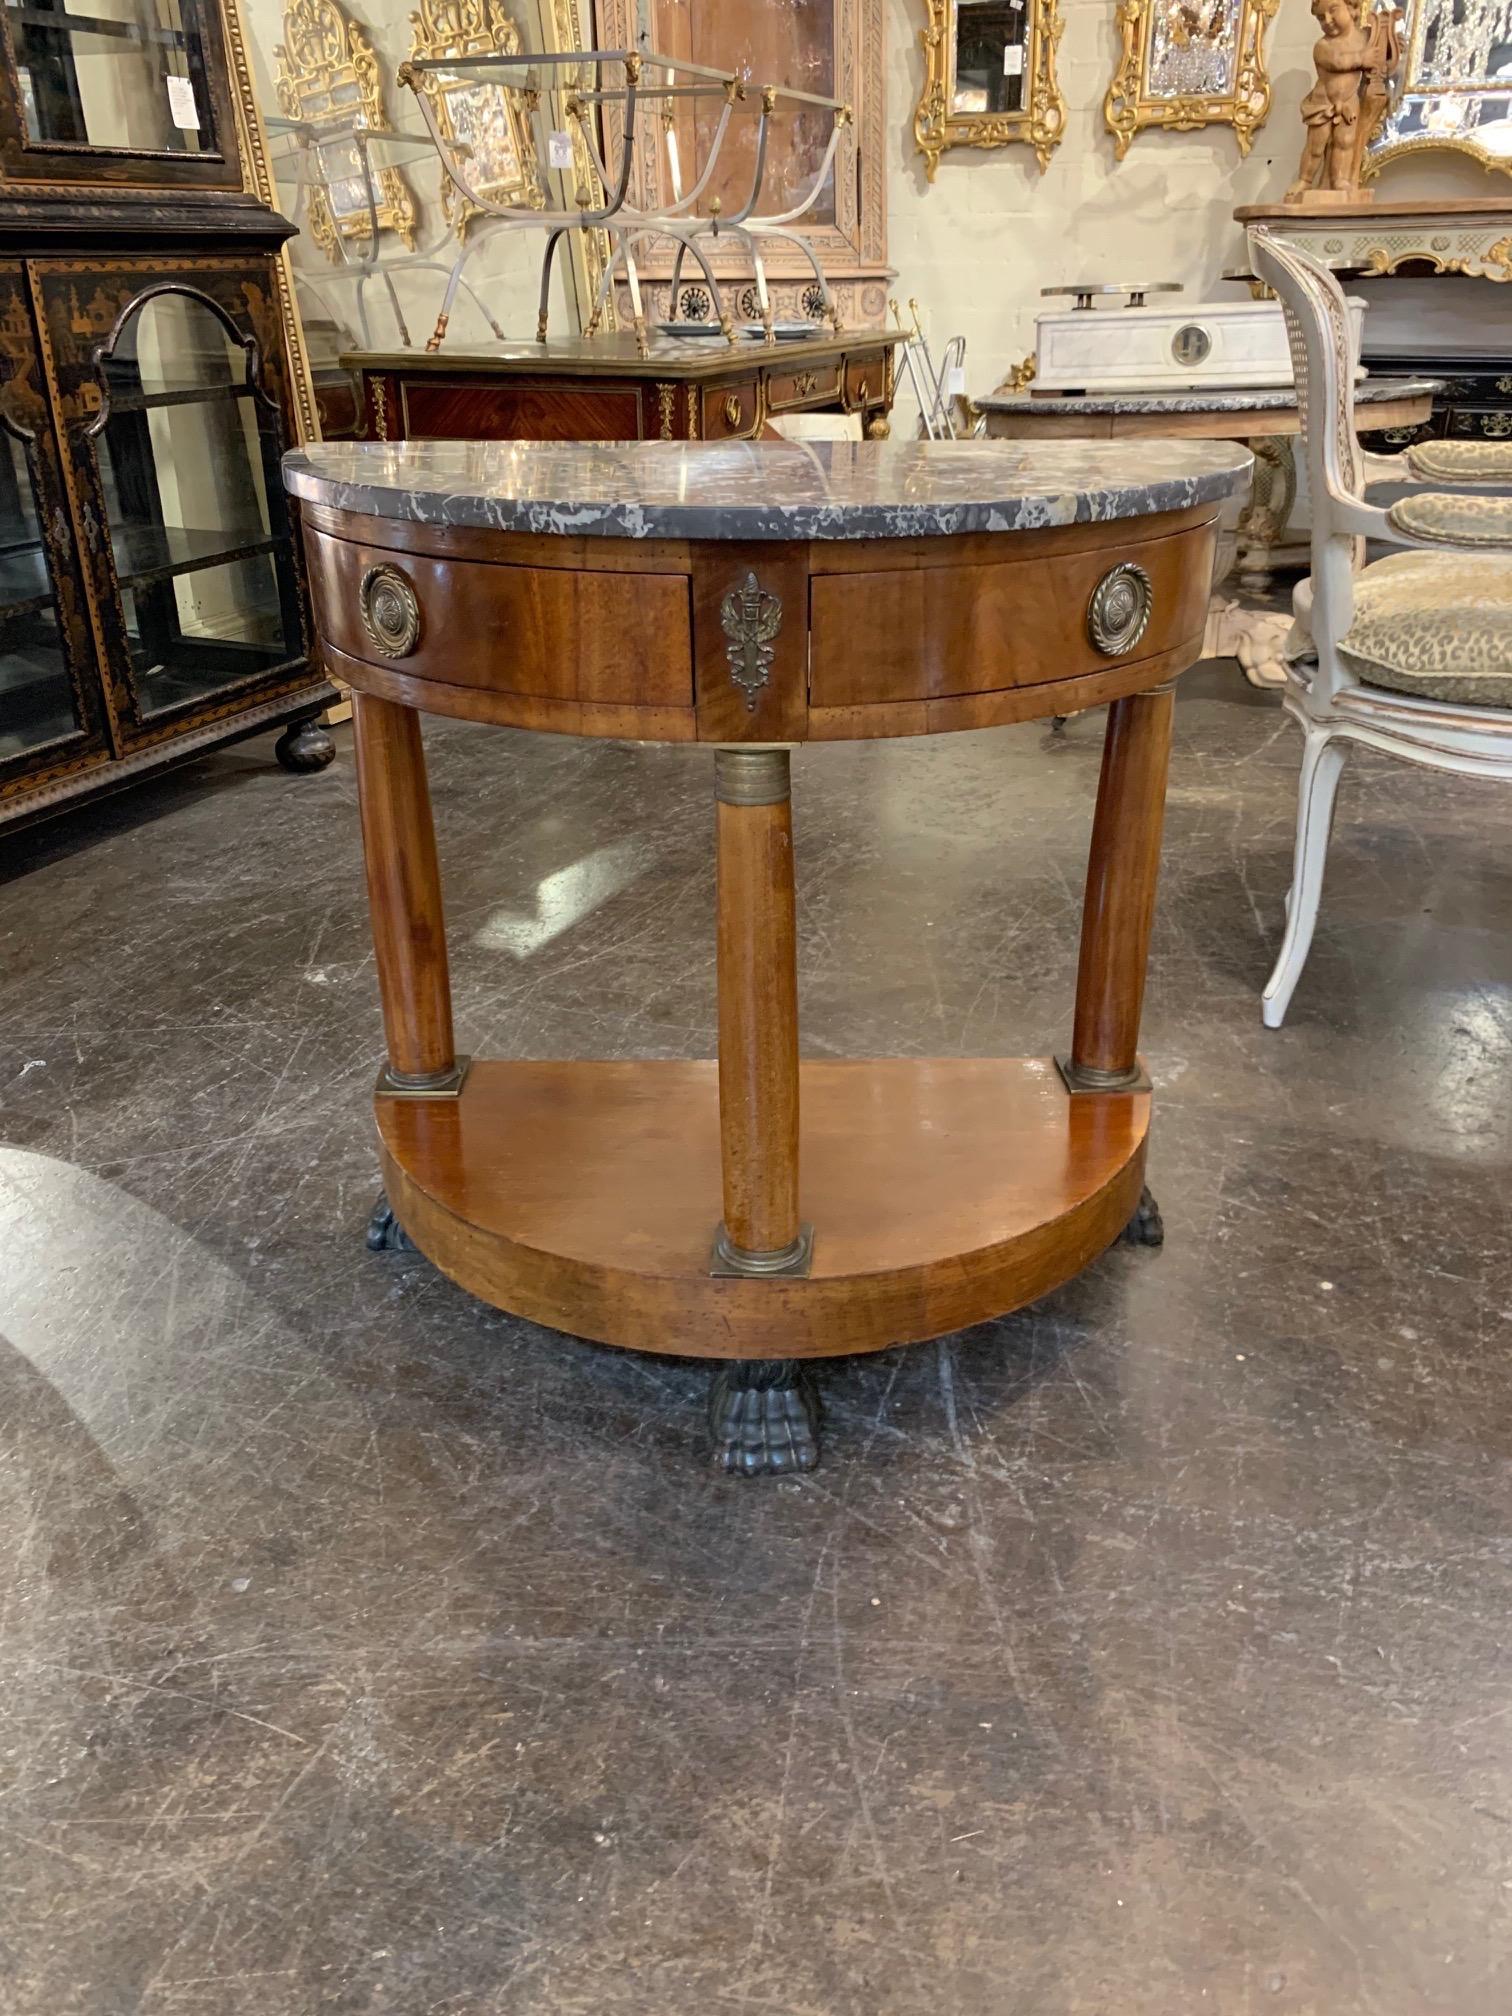 Very fine 19th century French Empire mahogany demilune side table with grey marble top. Nice details including brass hardware and claw feet. Beautiful finish on this piece as well!